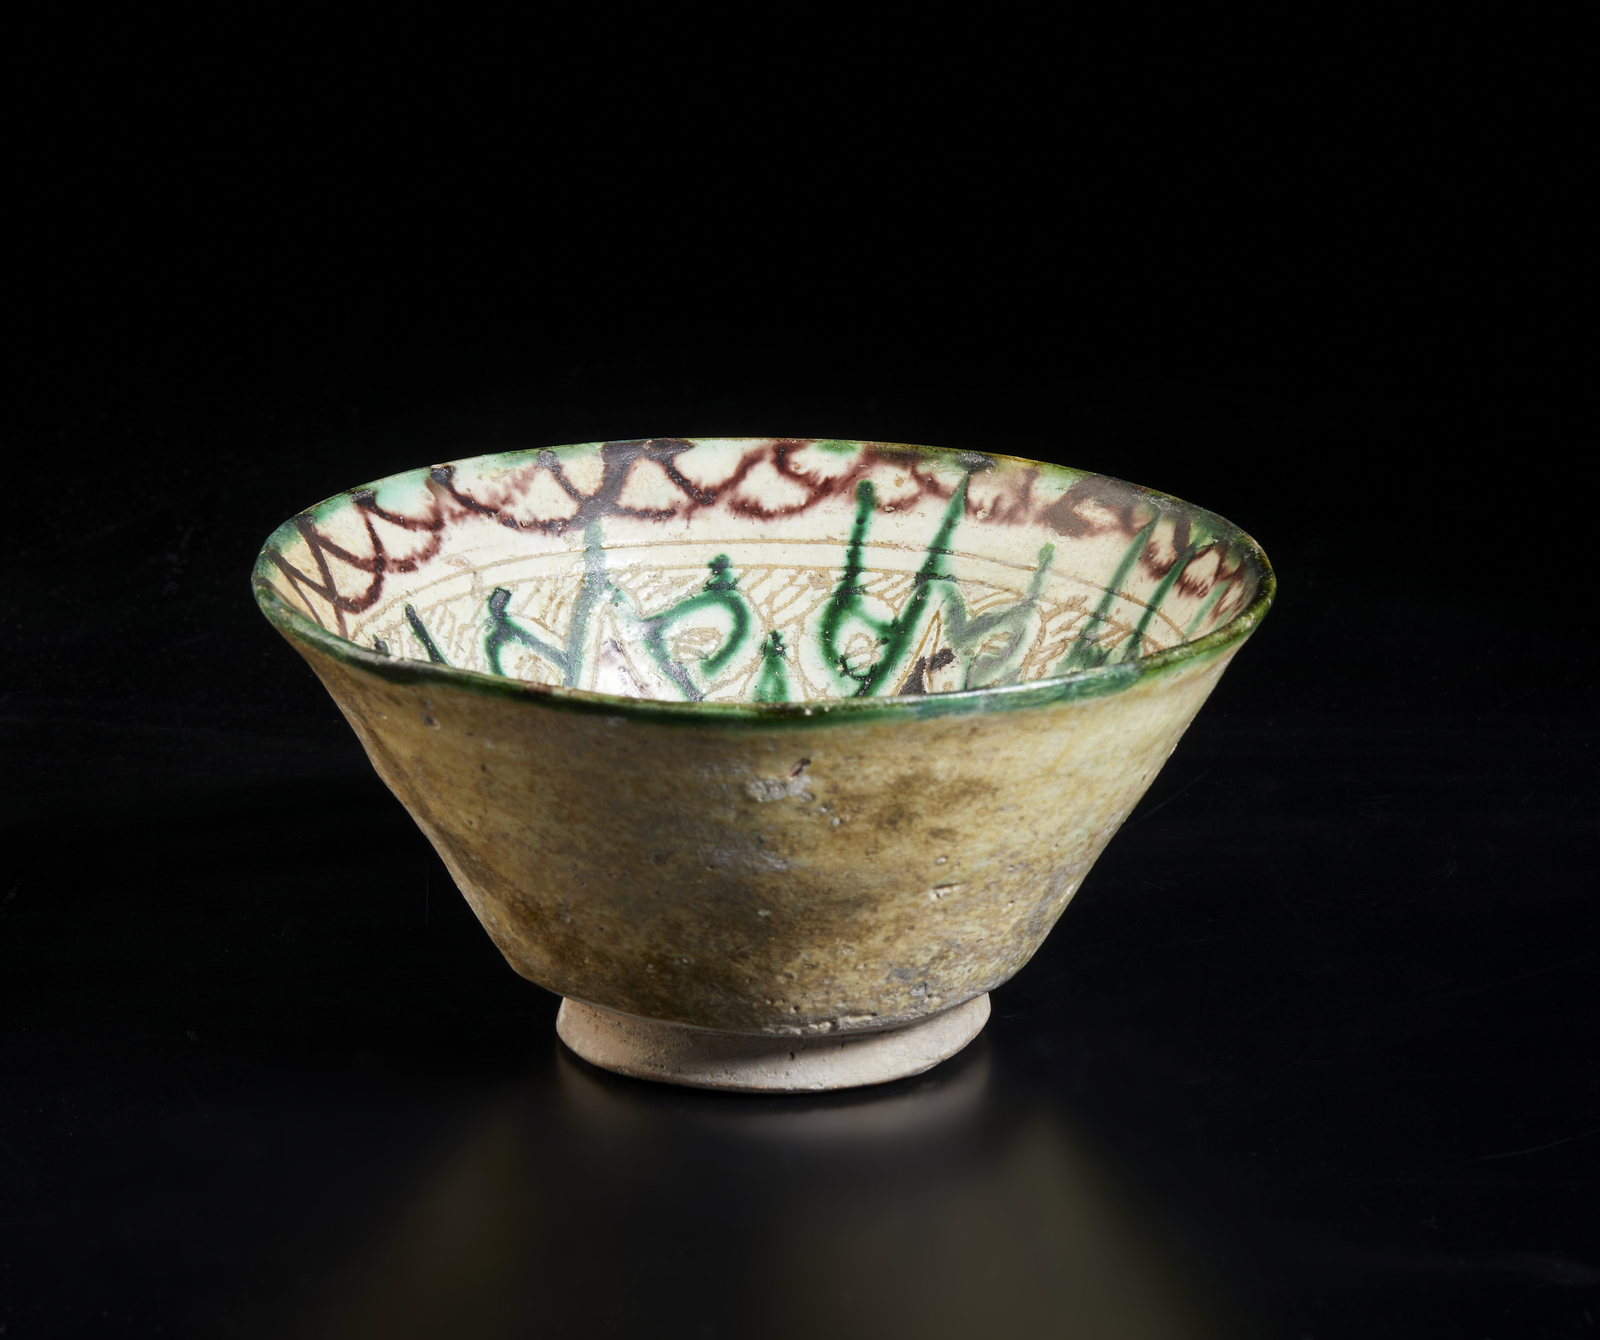 Arte Islamica A terracotta bowl with incised decoration Afghanistan, Bamiyan, 12 - 13th century .